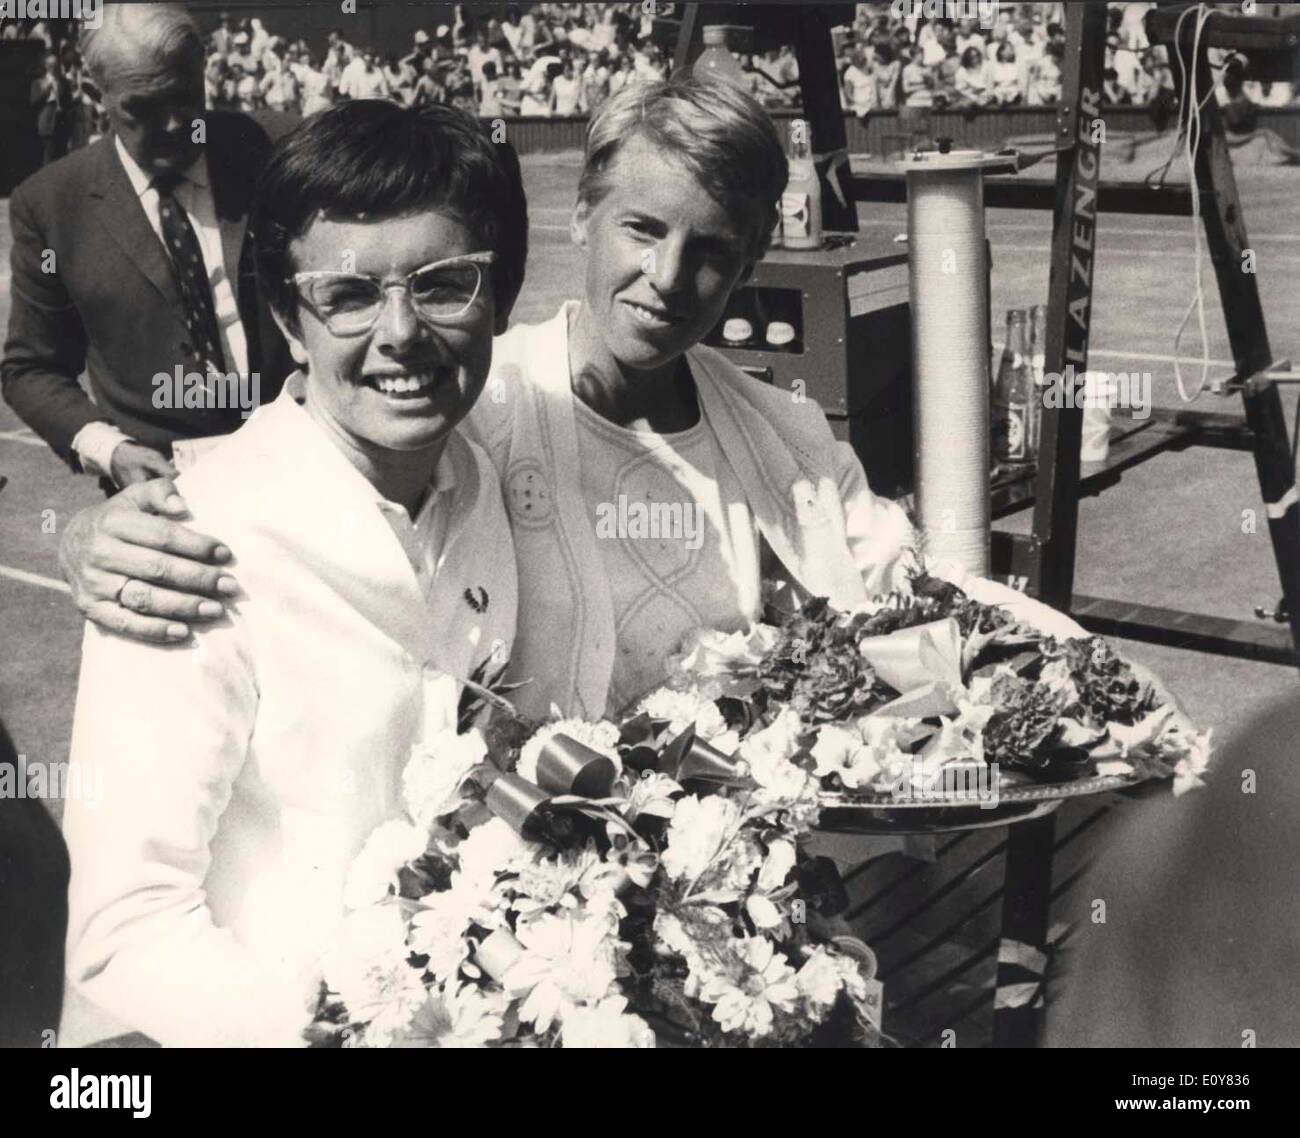 Apr 04, 1969 - London, England, United Kingdom - BILLIE JEAN KING (L) and ANN JONES at the presentation of the Championship Wimbledon game where Jones defeated King. Stock Photo